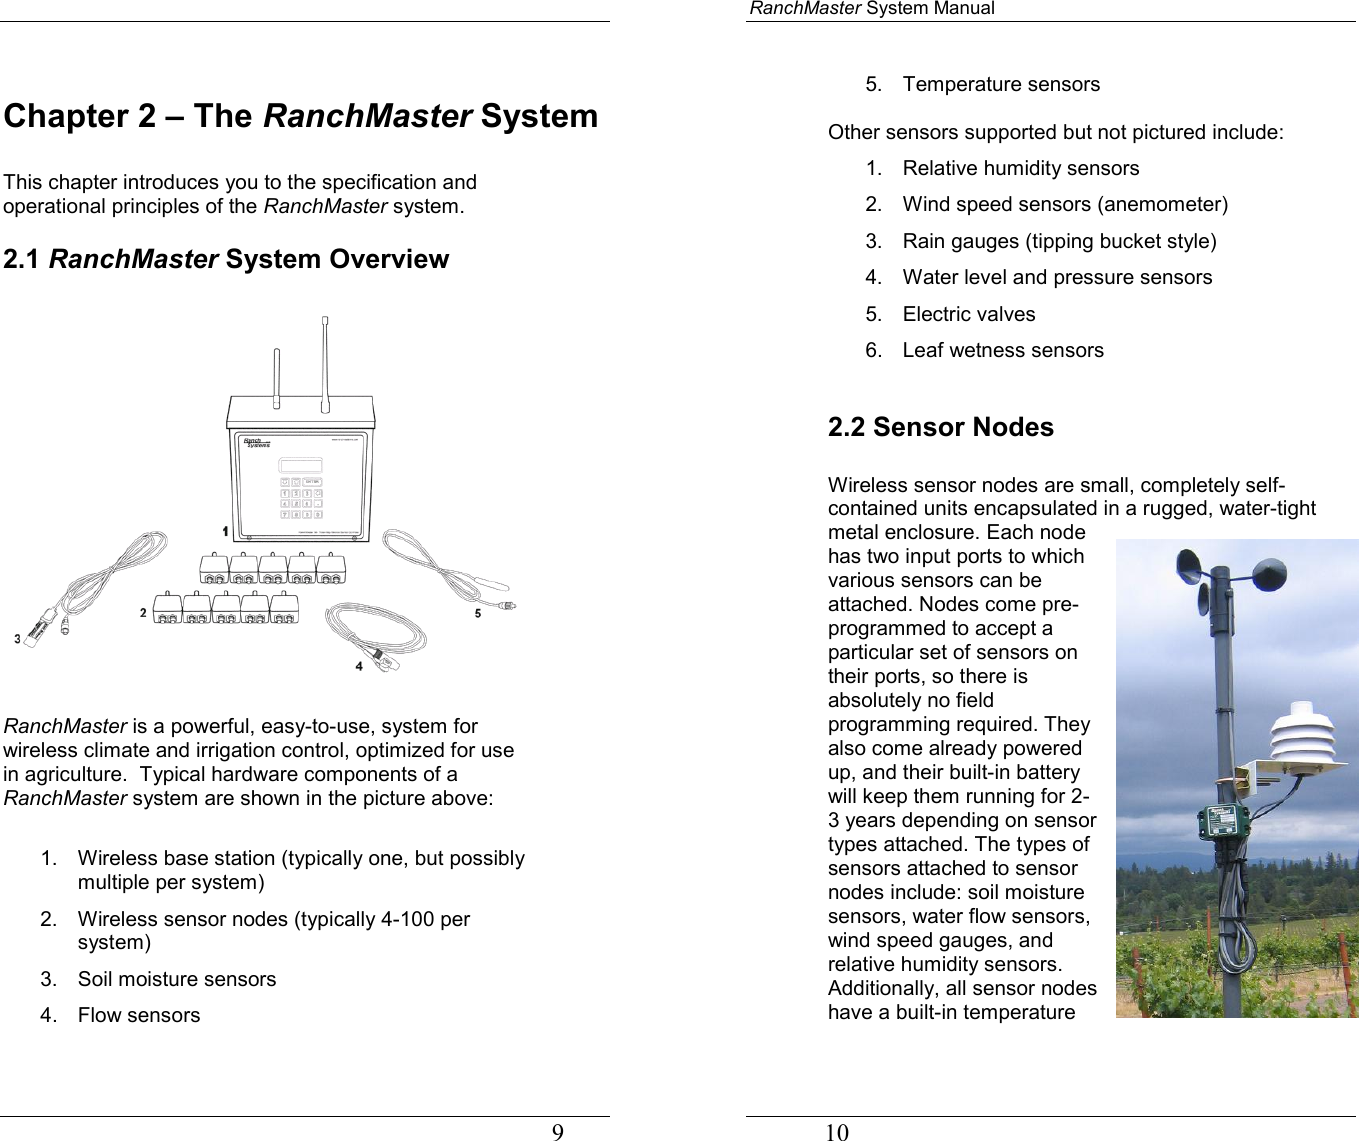                                                                                   9 Chapter 2 – The RanchMaster System  This chapter introduces you to the specification and operational principles of the RanchMaster system.  2.1 RanchMaster System Overview    RanchMaster is a powerful, easy-to-use, system for wireless climate and irrigation control, optimized for use in agriculture.  Typical hardware components of a RanchMaster system are shown in the picture above:  1.  Wireless base station (typically one, but possibly multiple per system) 2.  Wireless sensor nodes (typically 4-100 per system) 3.  Soil moisture sensors  4. Flow sensors RanchMaster System Manual             10 5. Temperature sensors  Other sensors supported but not pictured include: 1. Relative humidity sensors 2.  Wind speed sensors (anemometer) 3.  Rain gauges (tipping bucket style) 4.  Water level and pressure sensors 5. Electric valves 6. Leaf wetness sensors  2.2 Sensor Nodes  Wireless sensor nodes are small, completely self-contained units encapsulated in a rugged, water-tight metal enclosure. Each node has two input ports to which various sensors can be attached. Nodes come pre-programmed to accept a particular set of sensors on their ports, so there is absolutely no field programming required. They also come already powered up, and their built-in battery will keep them running for 2-3 years depending on sensor types attached. The types of sensors attached to sensor nodes include: soil moisture sensors, water flow sensors, wind speed gauges, and relative humidity sensors. Additionally, all sensor nodes have a built-in temperature 